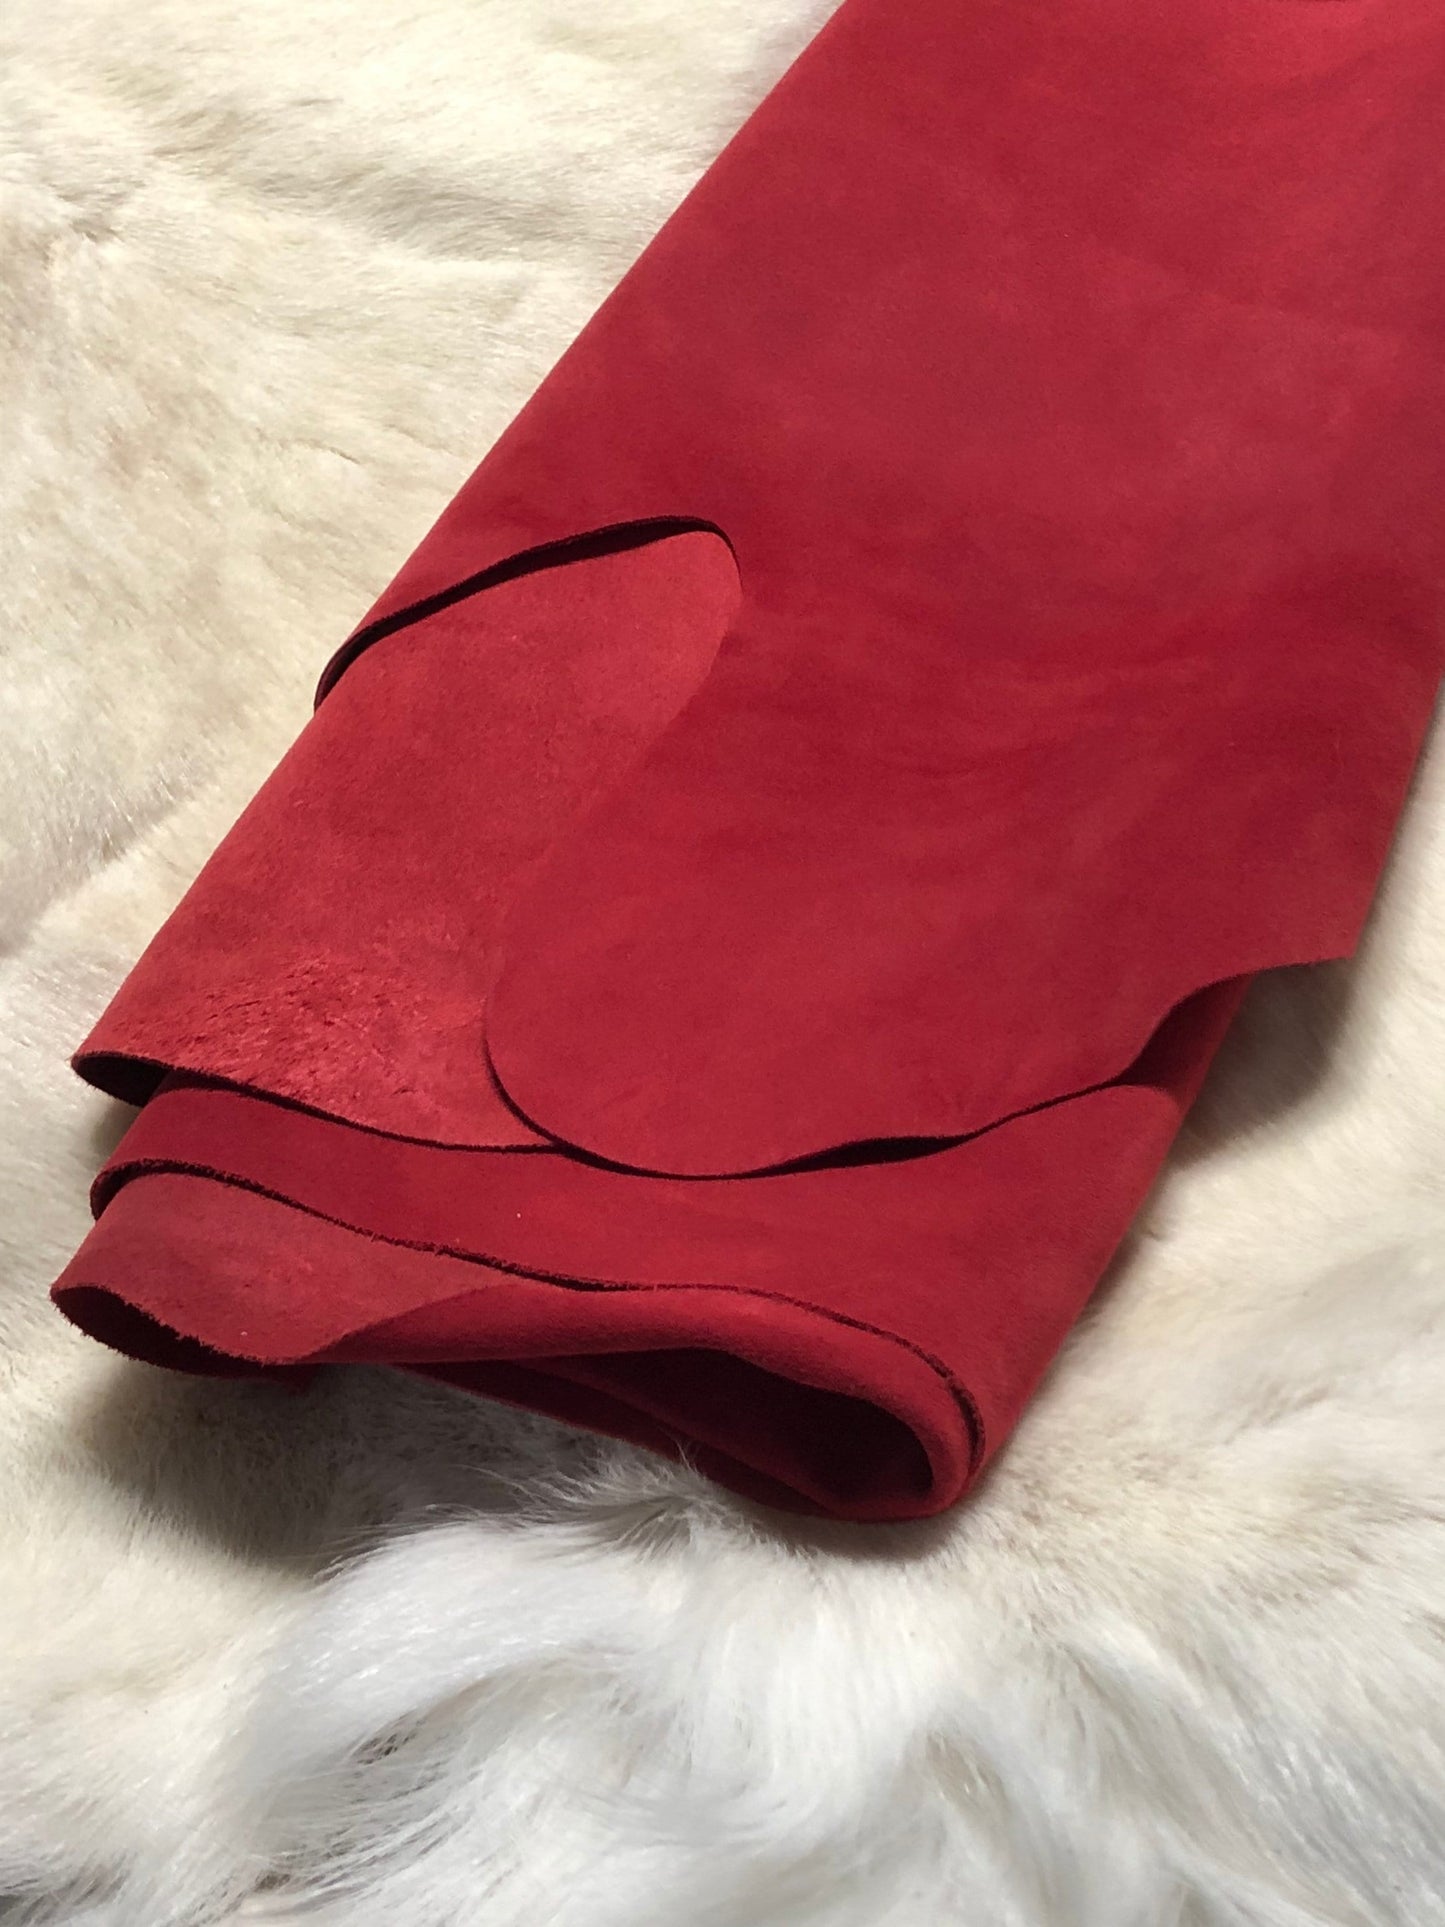 Red Suede Designer leather - Raw Leather - Wholesale Leather 2-4oz